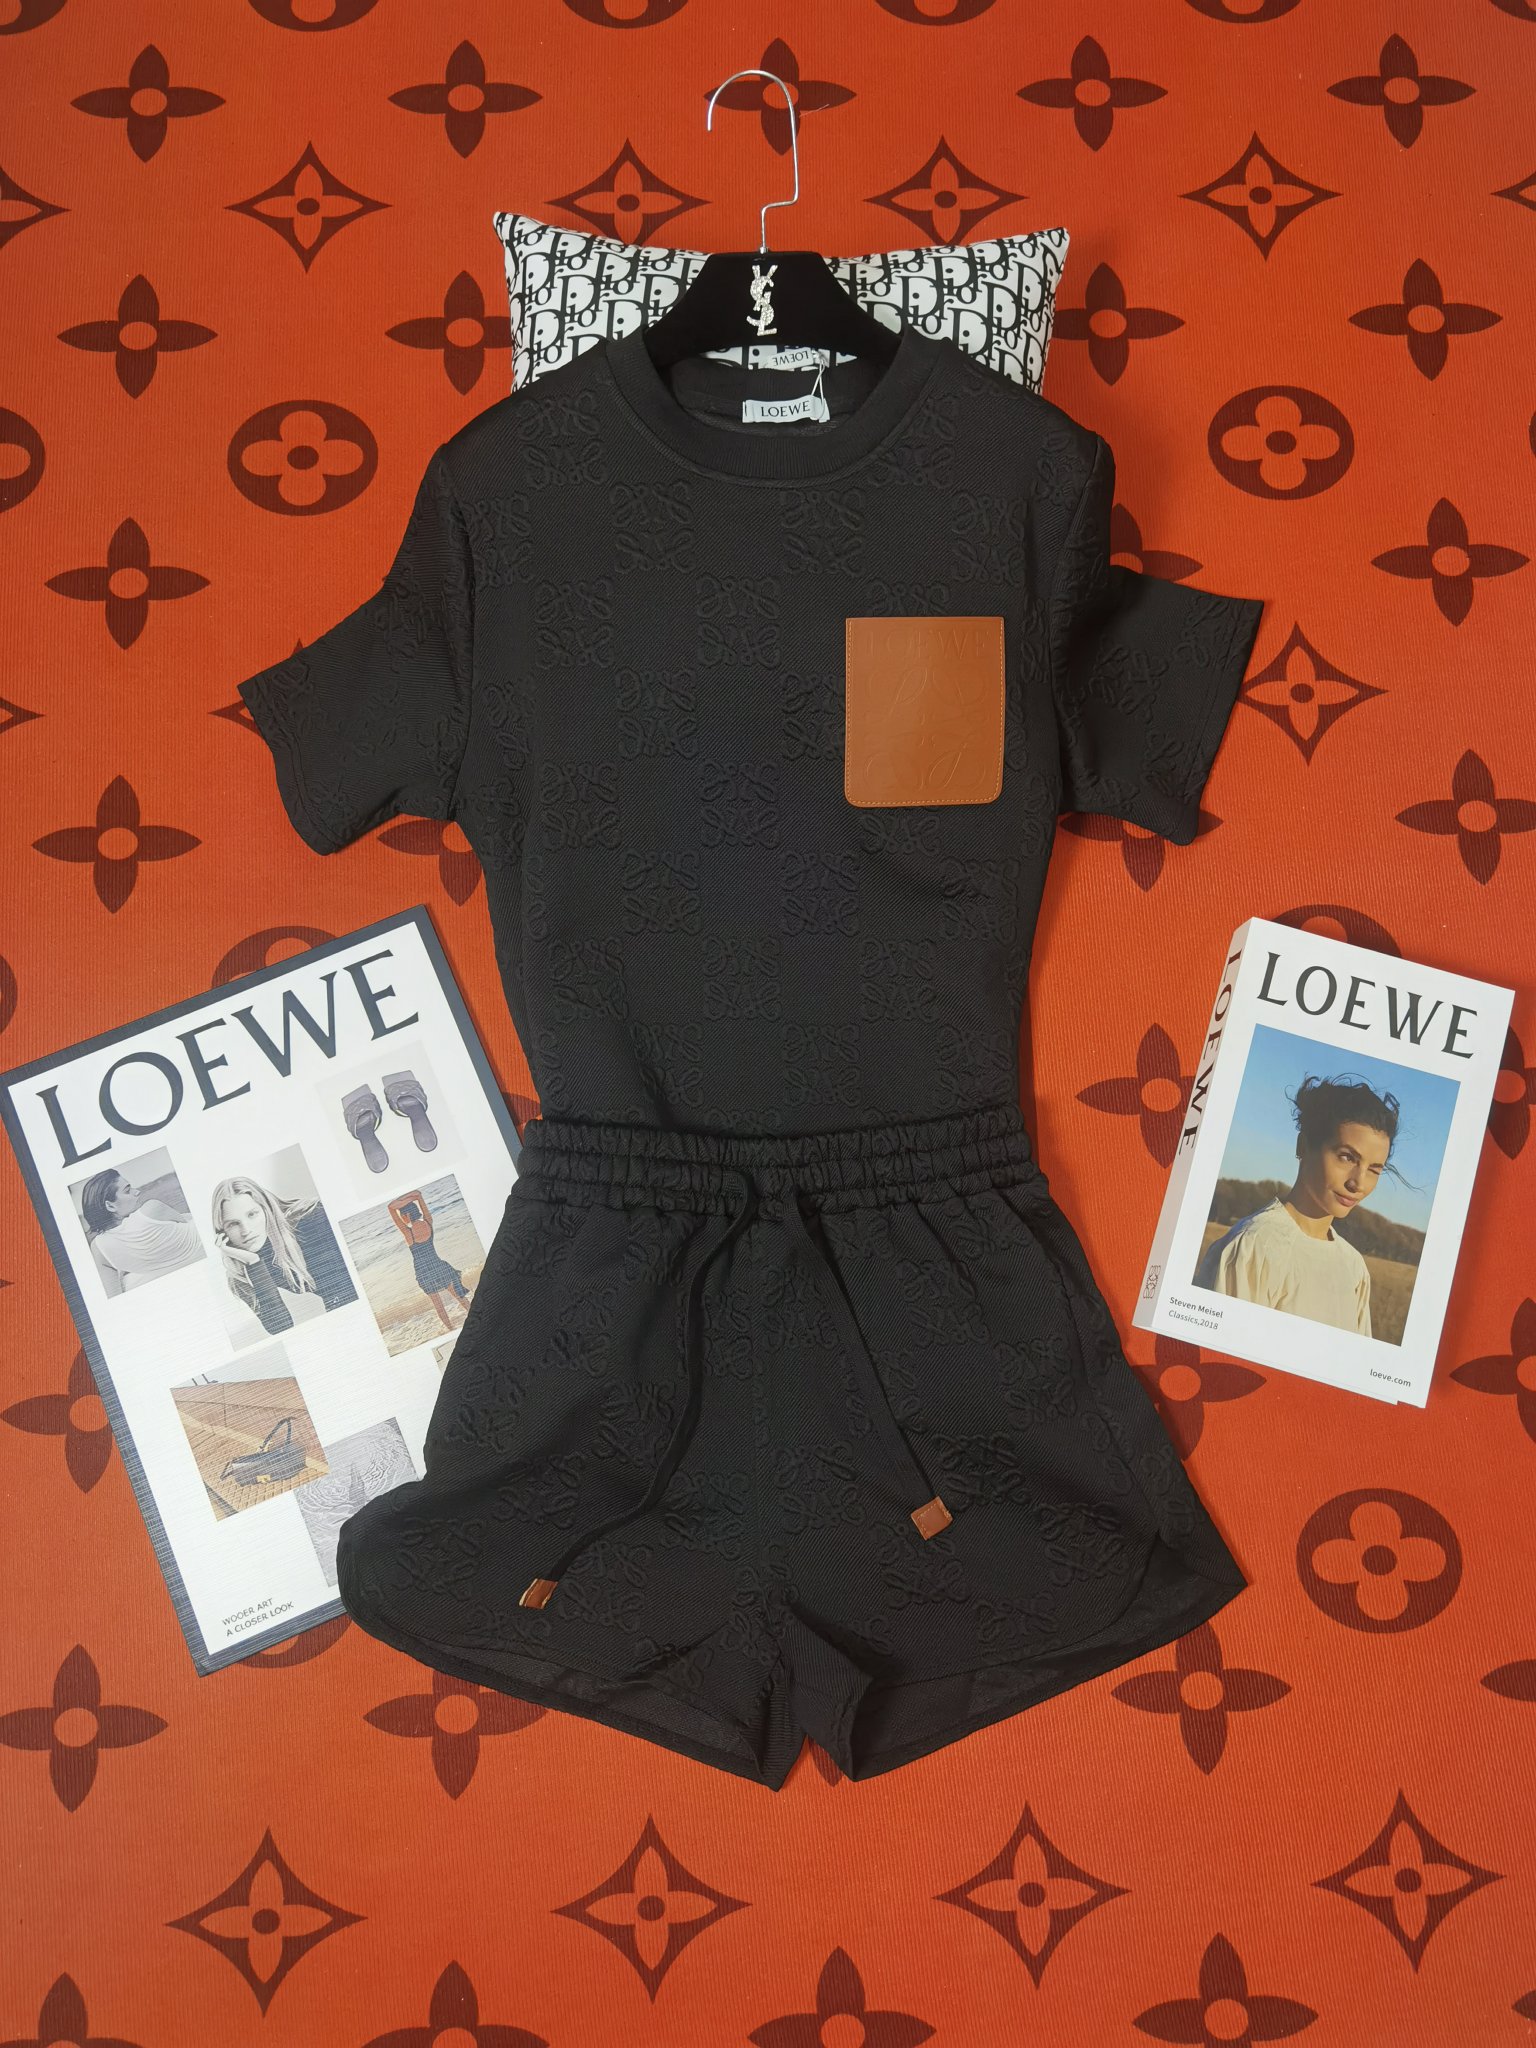 Loewe Clothing T-Shirt Two Piece Outfits & Matching Sets Black White Short Sleeve